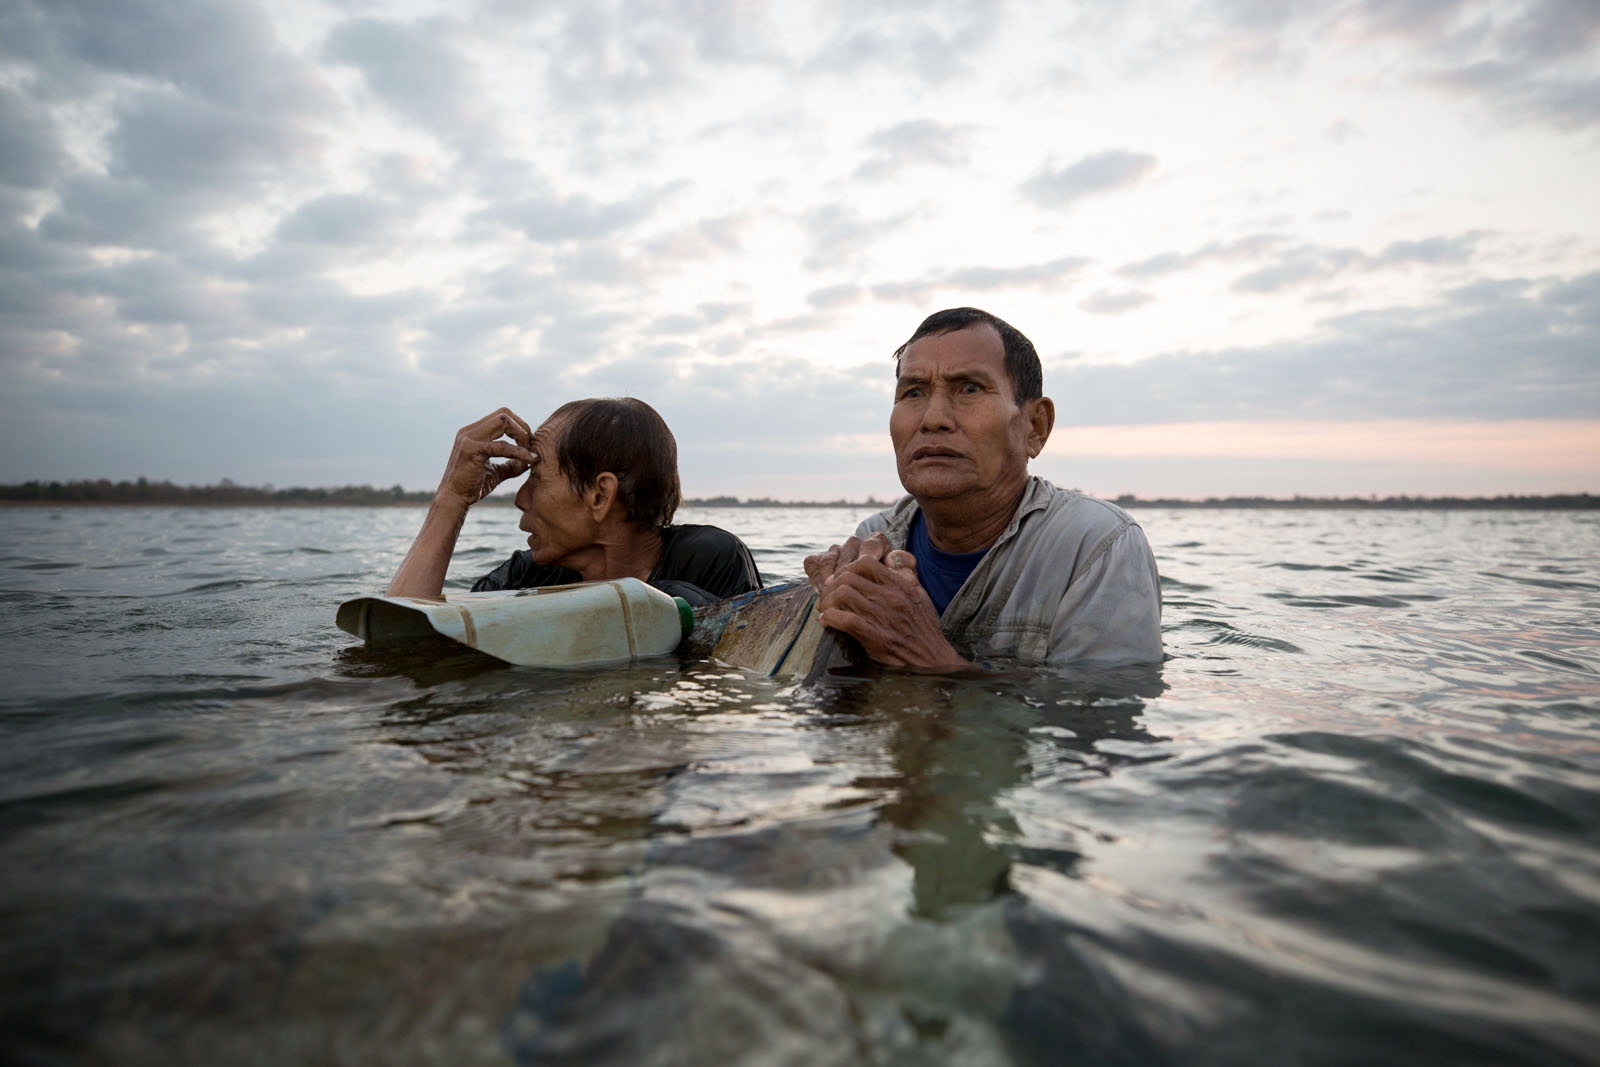 WHAT LIES BELOW SHOULD STAY BELOW - Thai villagers Por Lua and Por Wikan (left) anxiously...